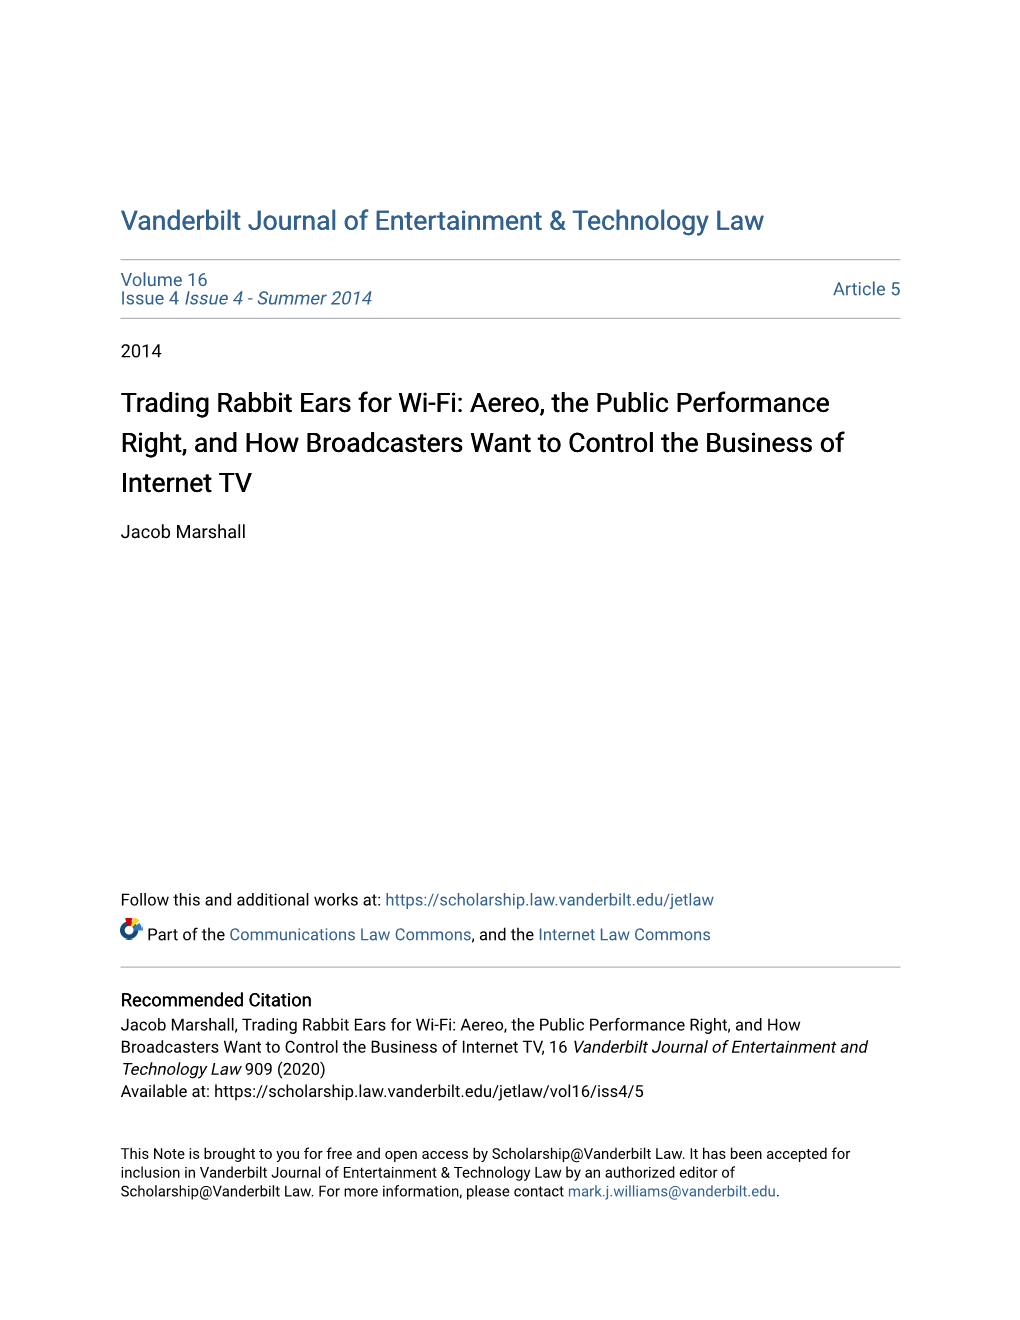 Trading Rabbit Ears for Wi-Fi: Aereo, the Public Performance Right, and How Broadcasters Want to Control the Business of Internet TV